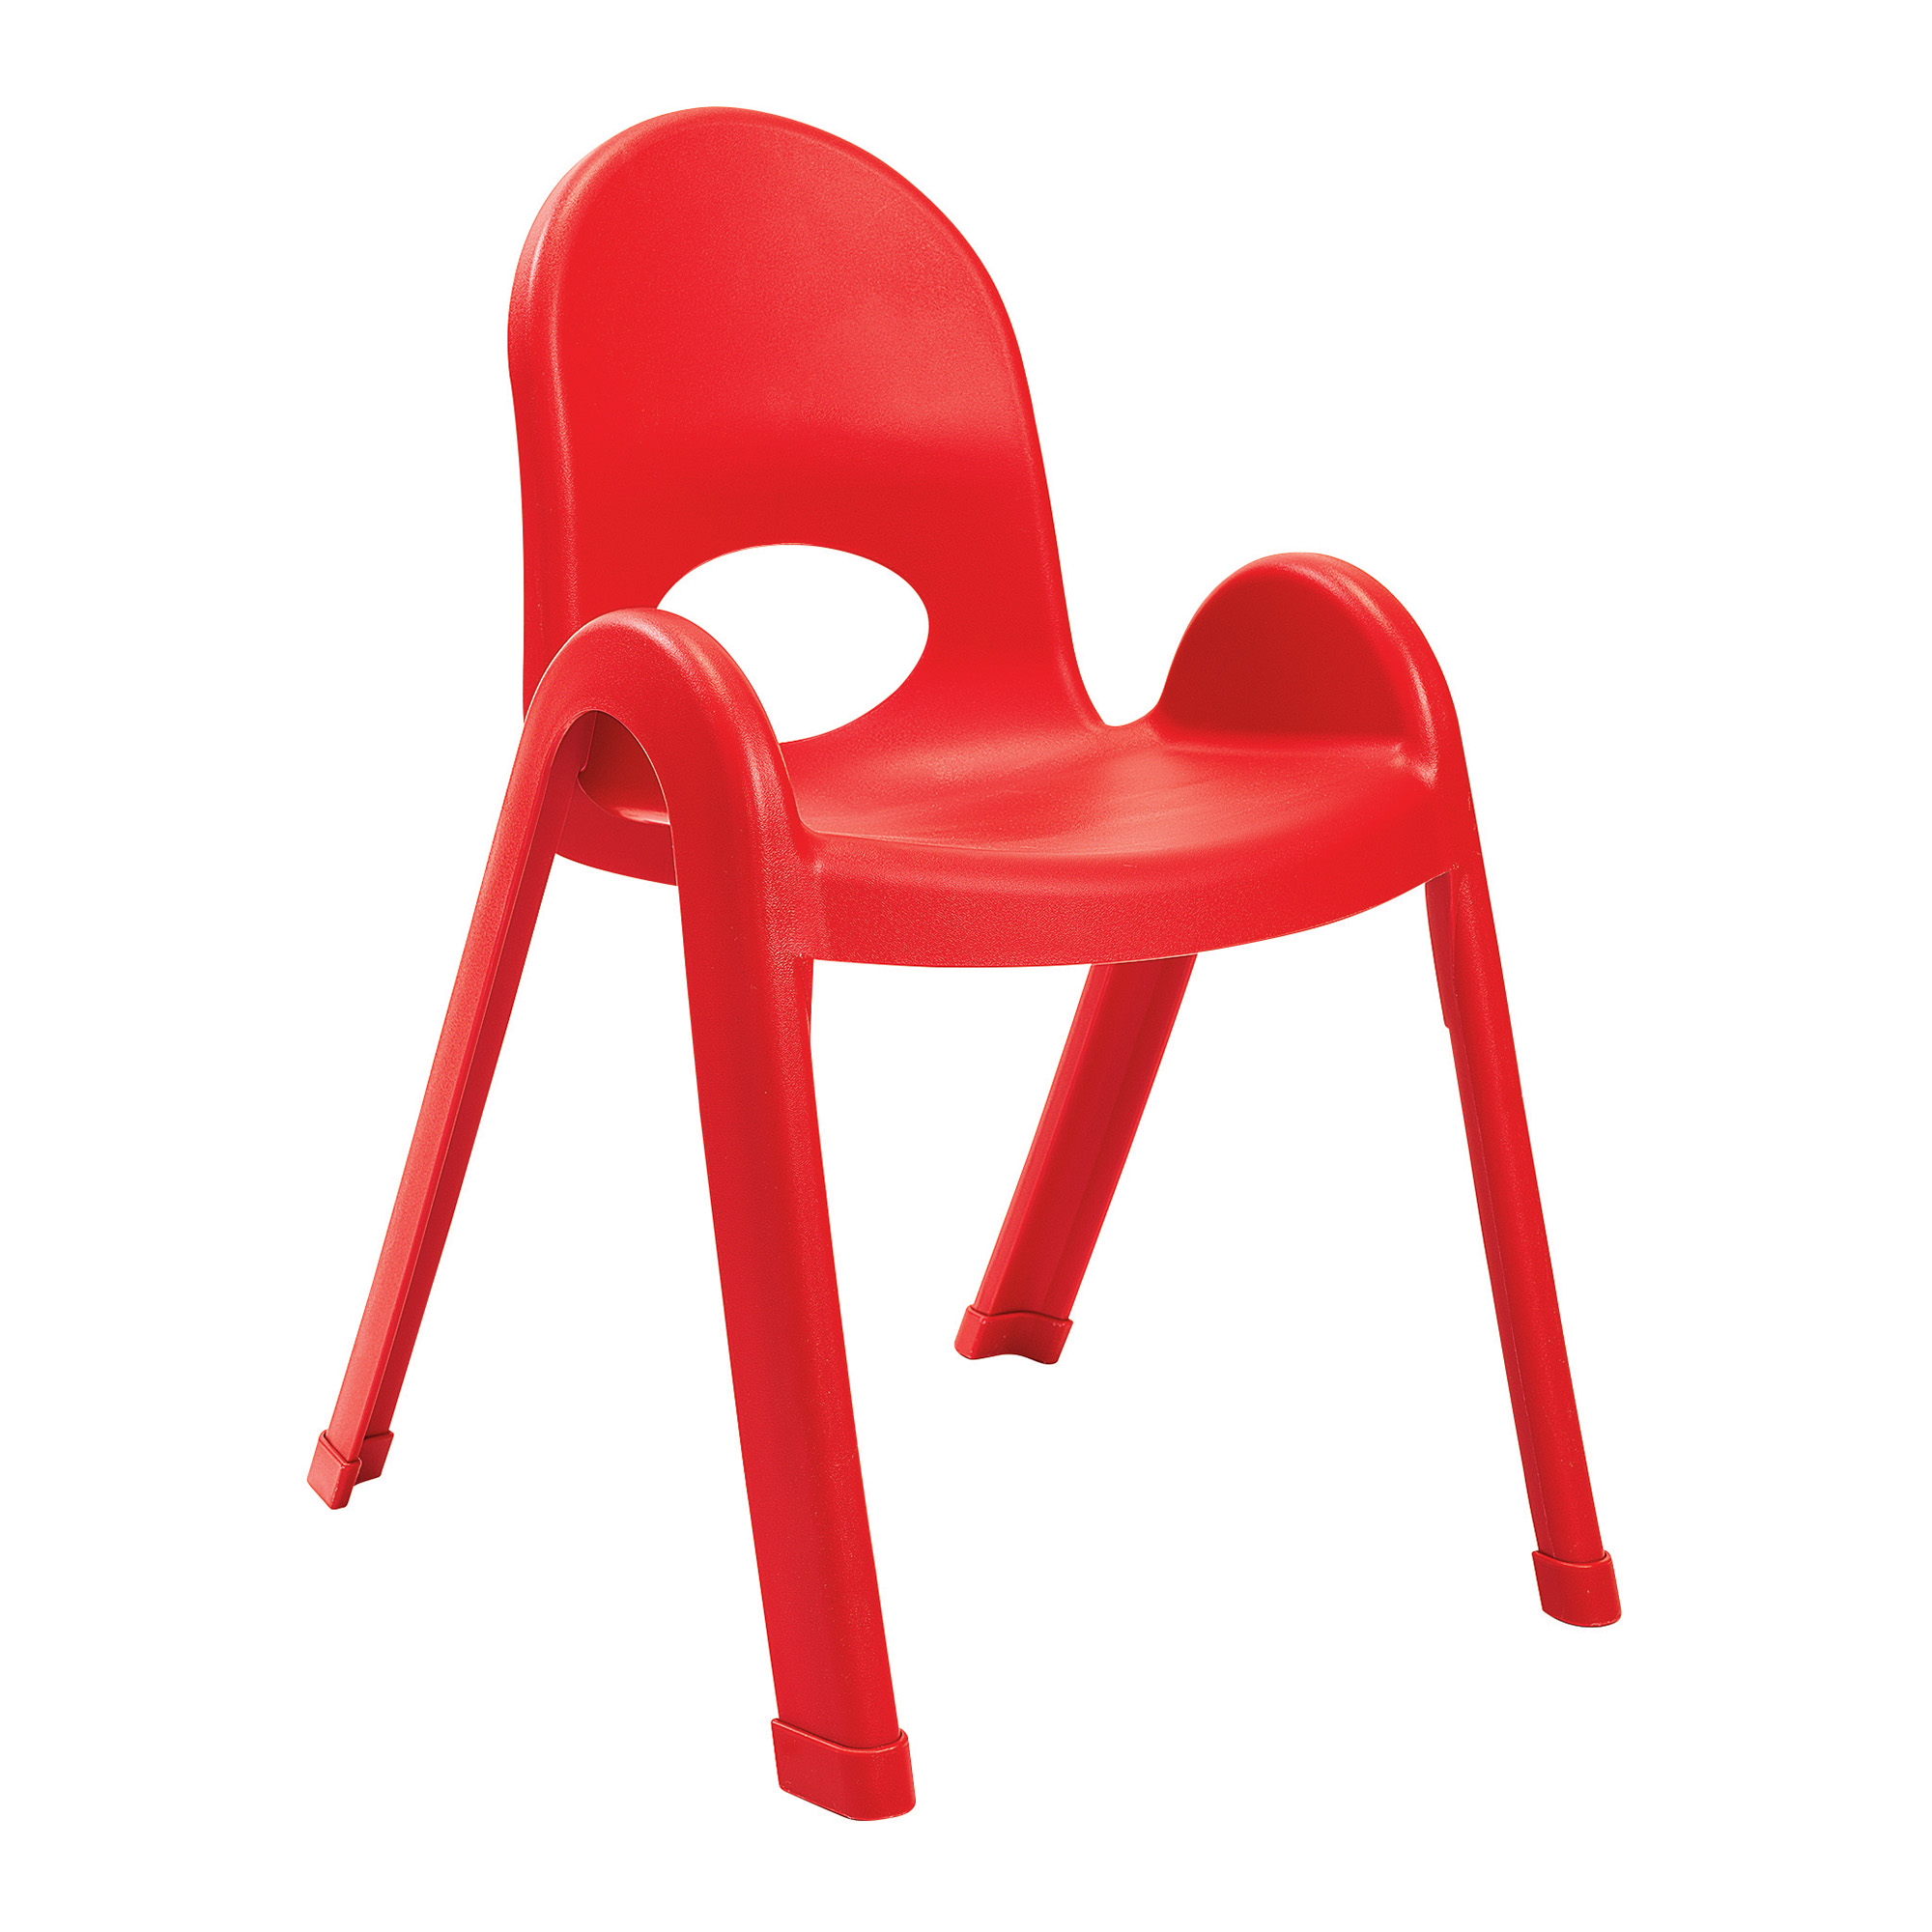 Value Stack™ 33 cm  Chair - Candy Apple Red